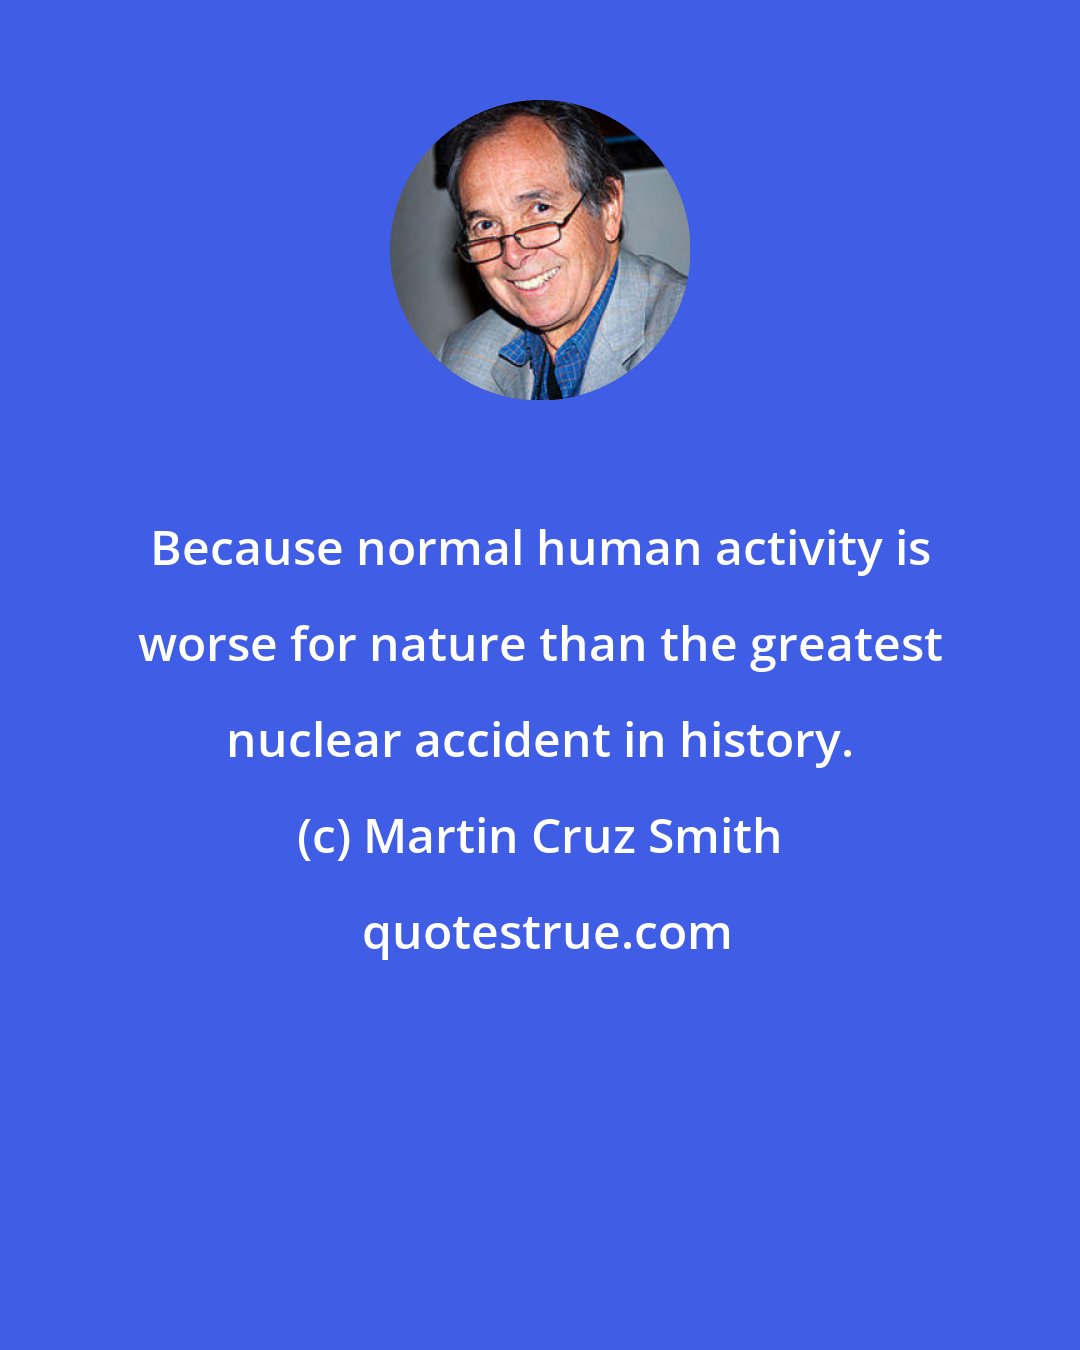 Martin Cruz Smith: Because normal human activity is worse for nature than the greatest nuclear accident in history.